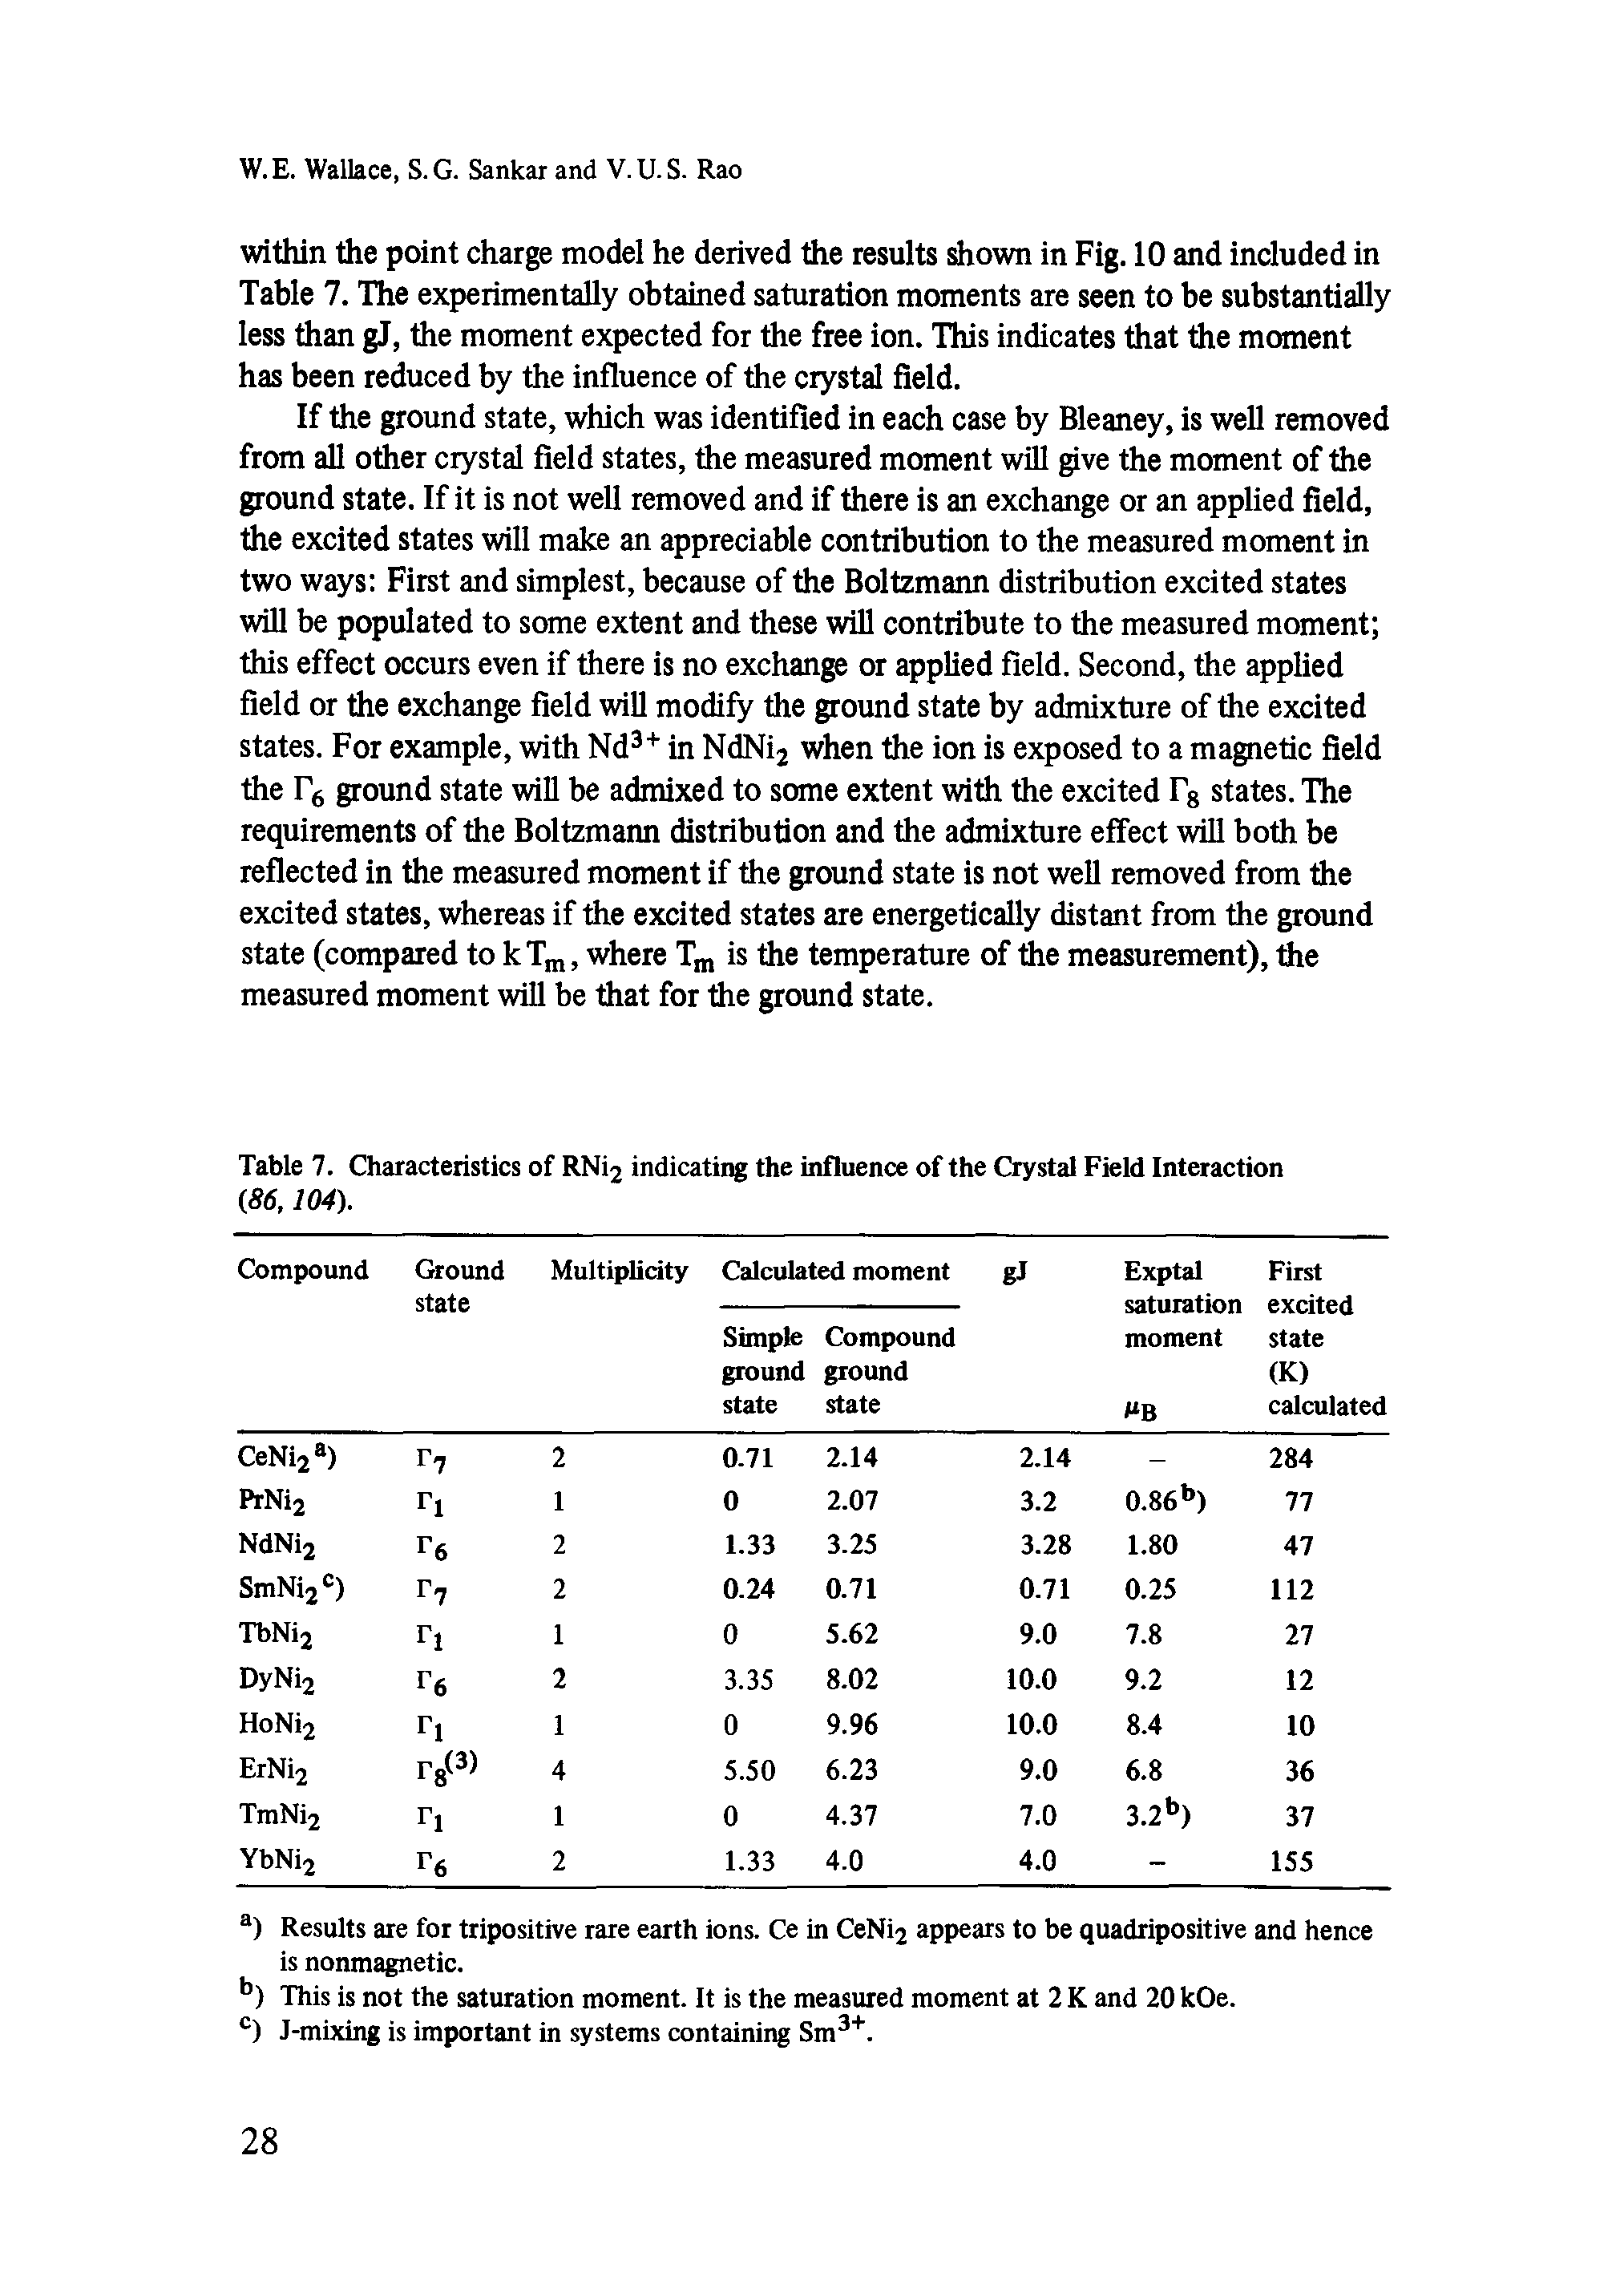 Table 7. Characteristics of RNi2 indicating the influence of the Crystal Field Interaction (86,104).